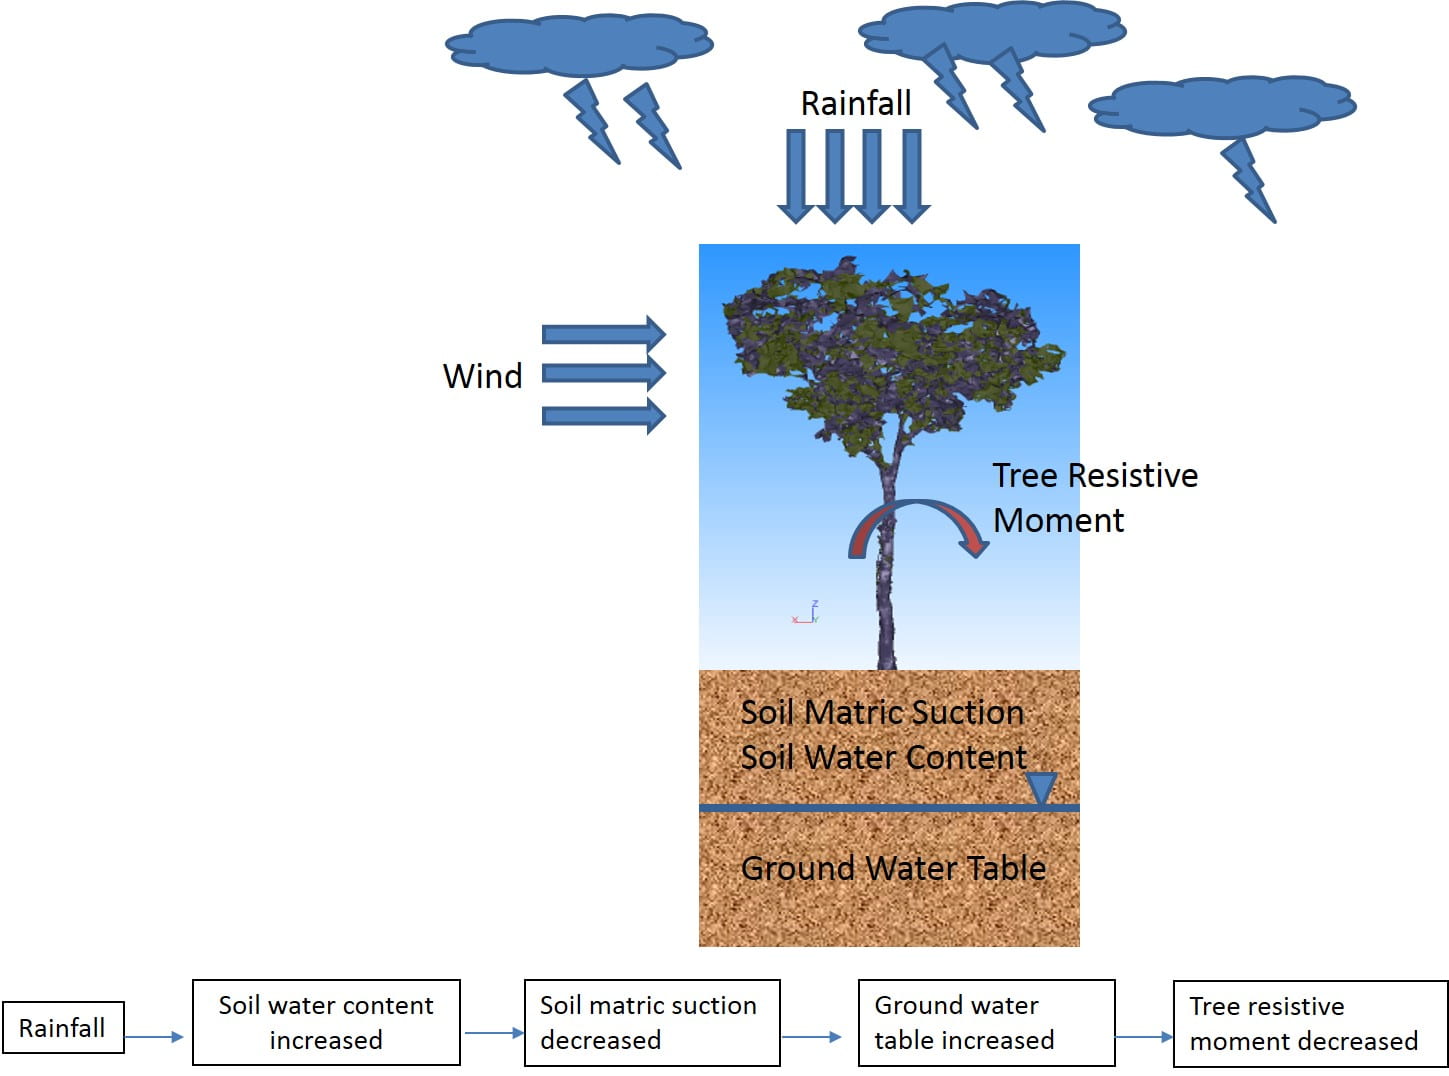 The effect of rainfall on tree stability